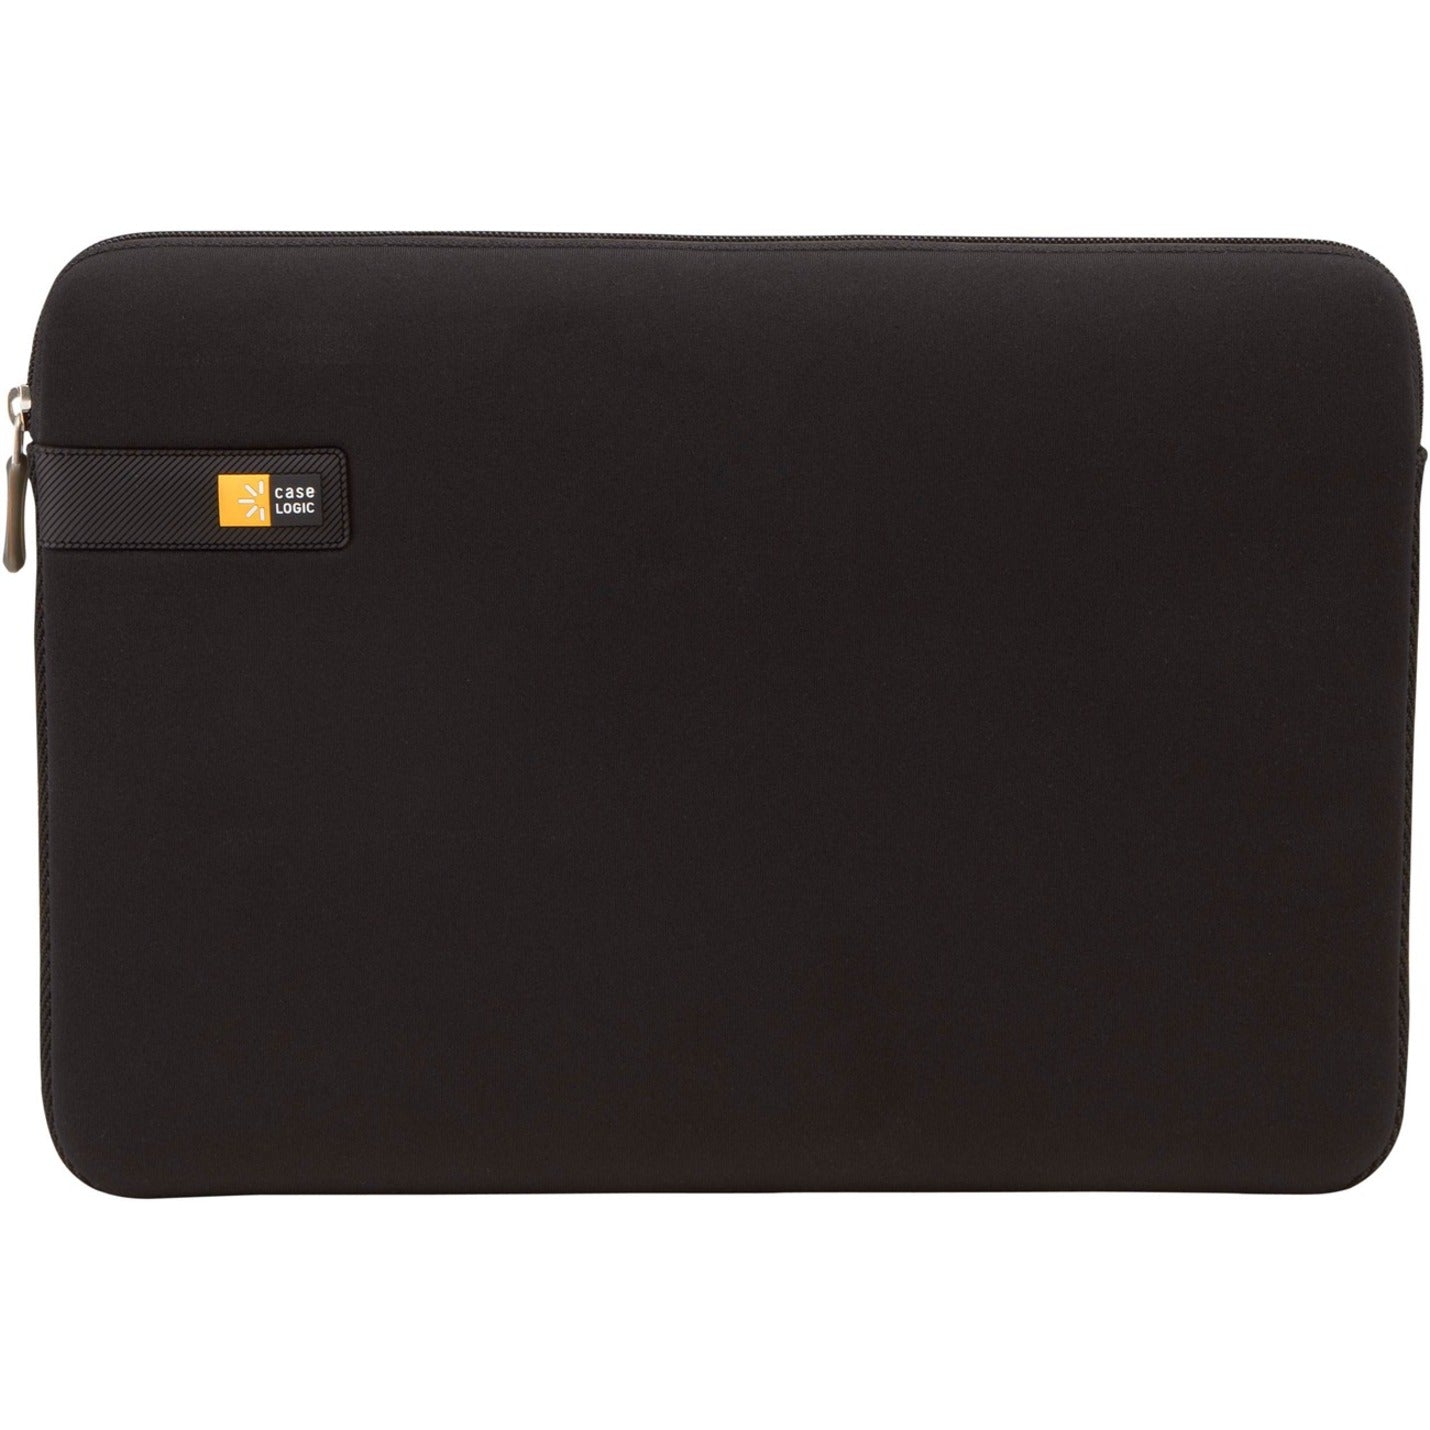 Case Logic 3201354 14" Laptop Sleeve, Sleek and Protective Black Carrying Case [Discontinued]